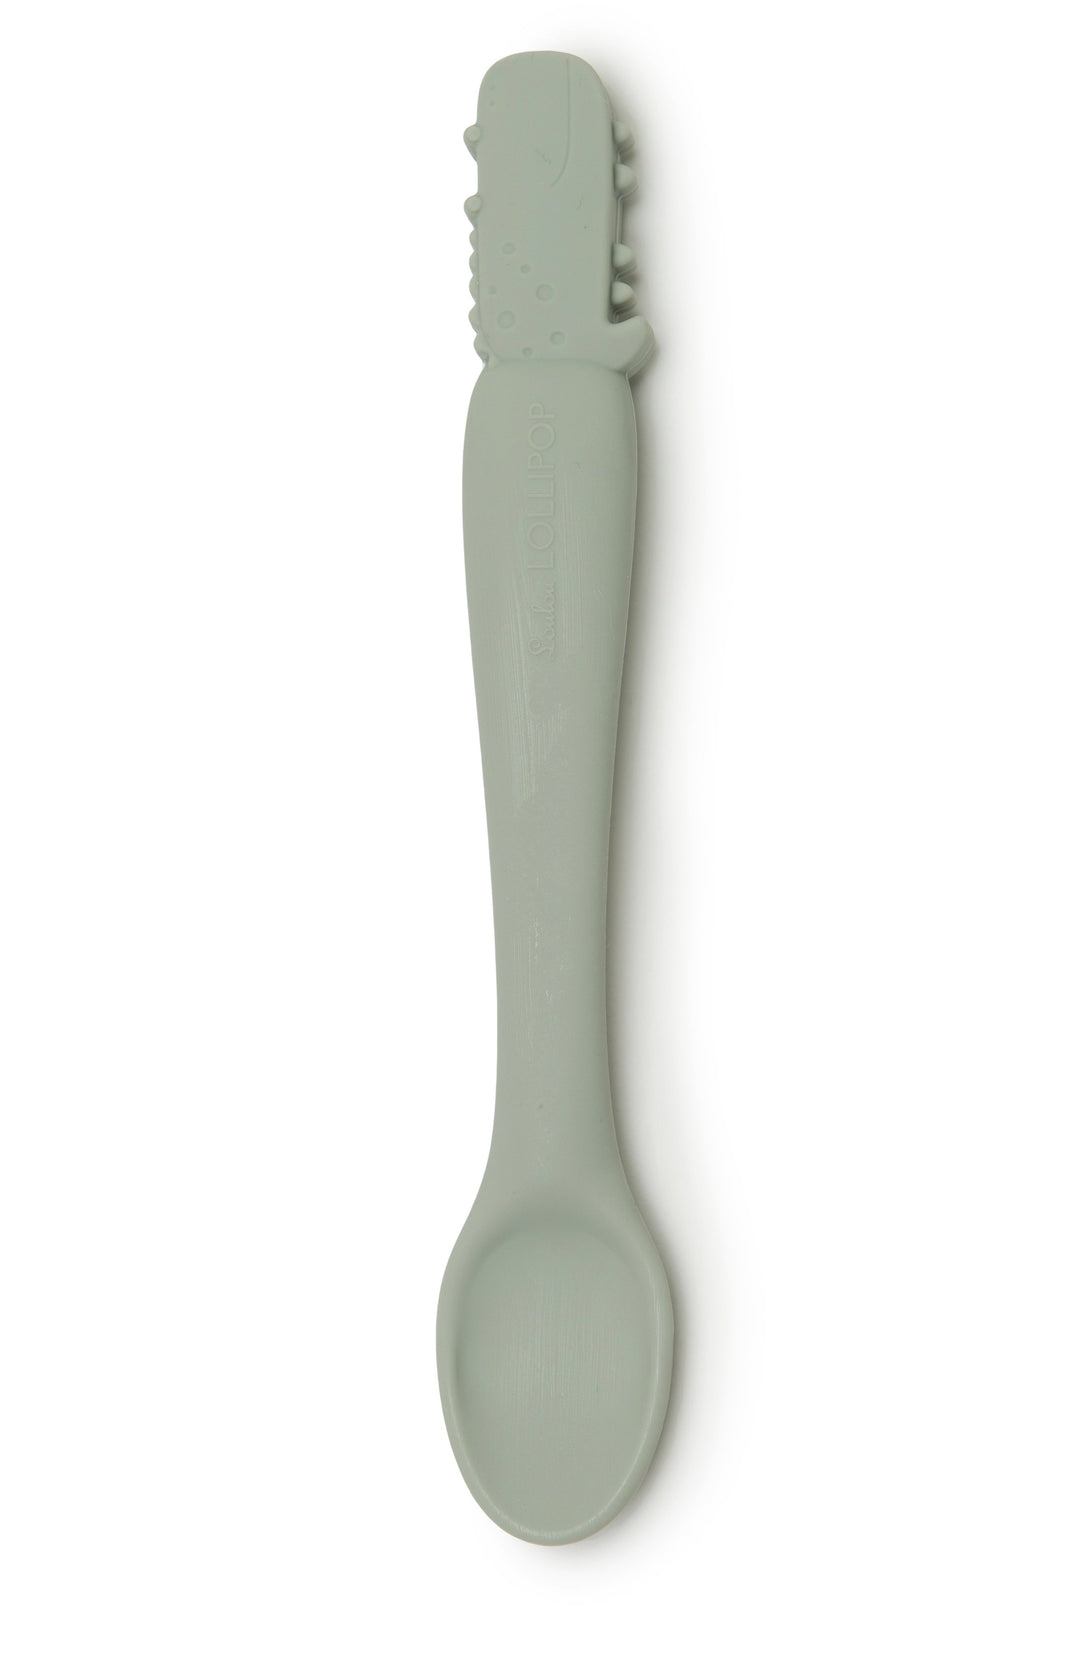 alligator sage green Silicone Infant Feeding Spoon from LouLou Lollipop